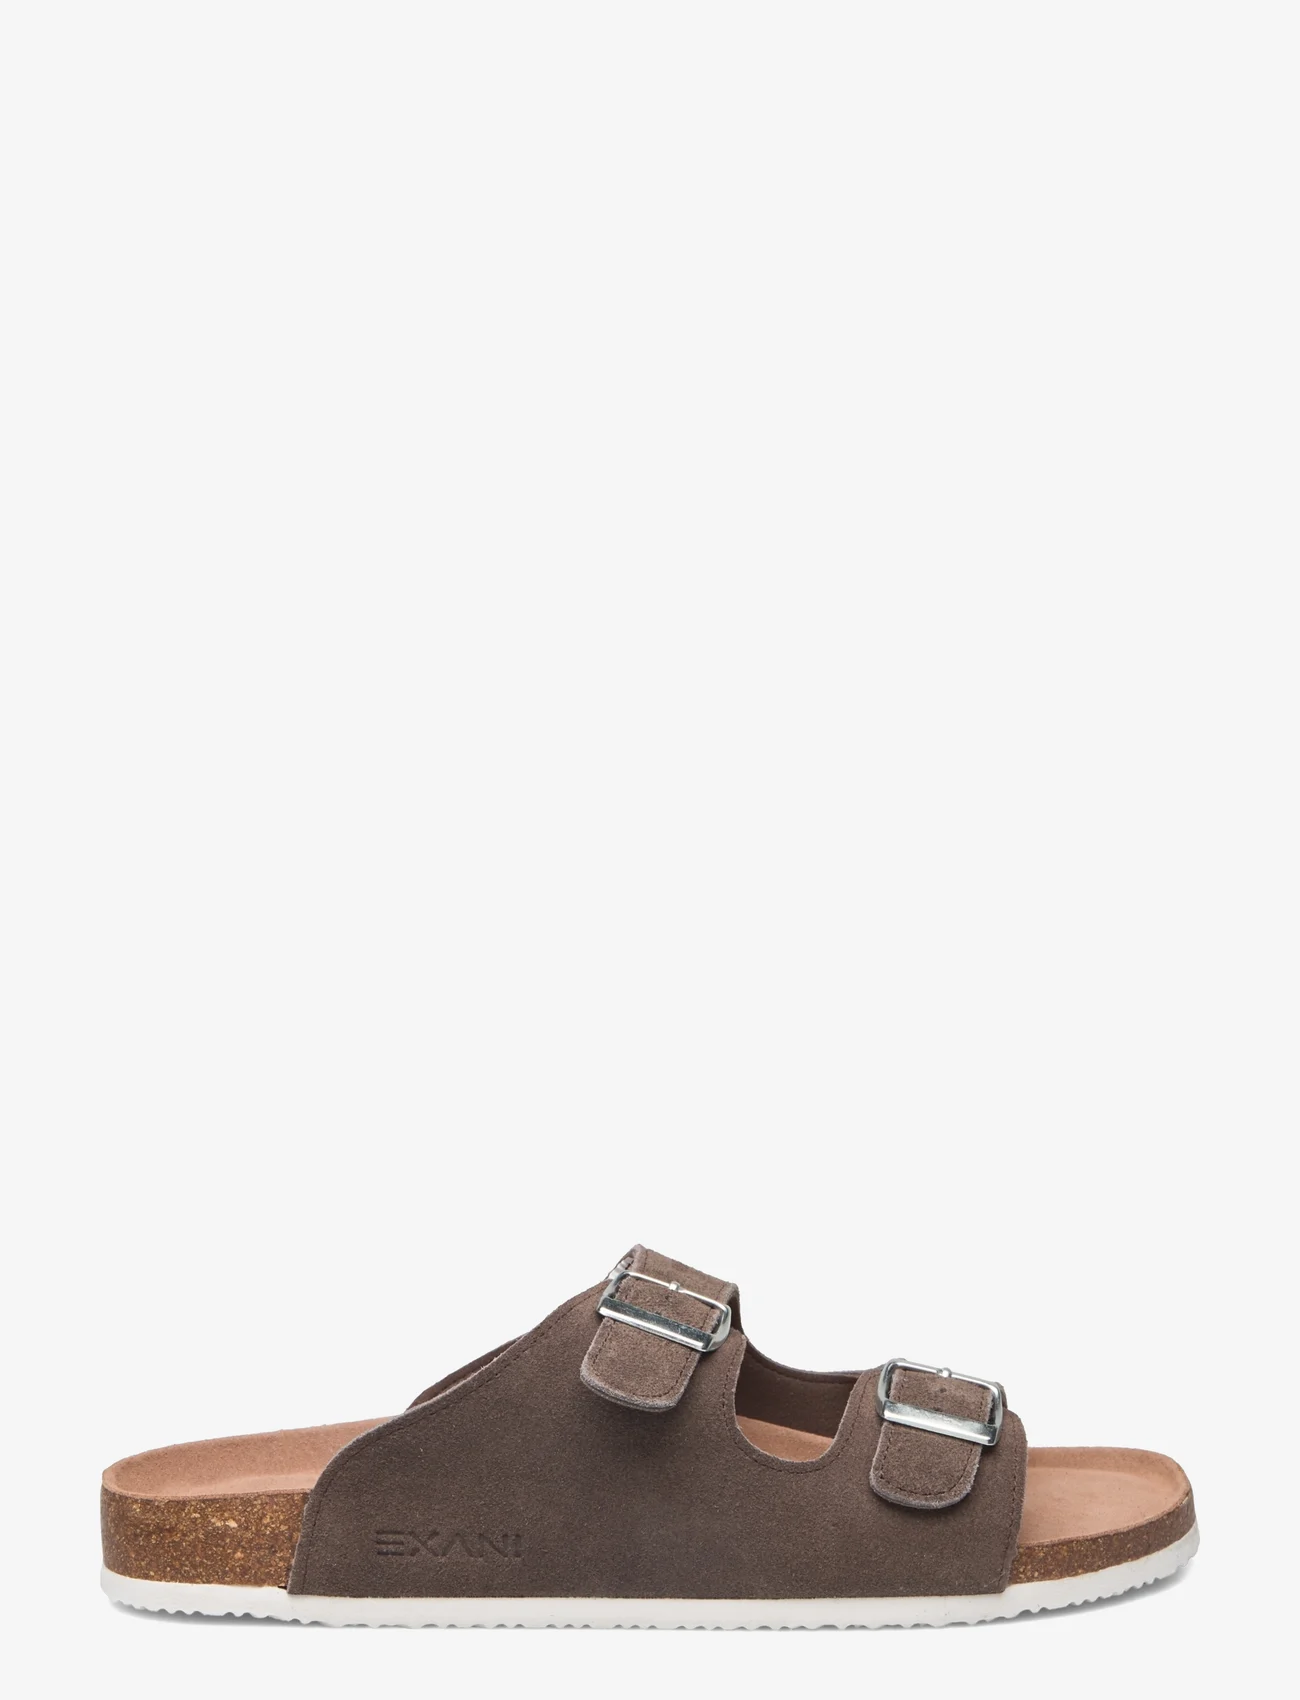 Exani - SPECTRA SUEDE M - sandaalid - brown - 1